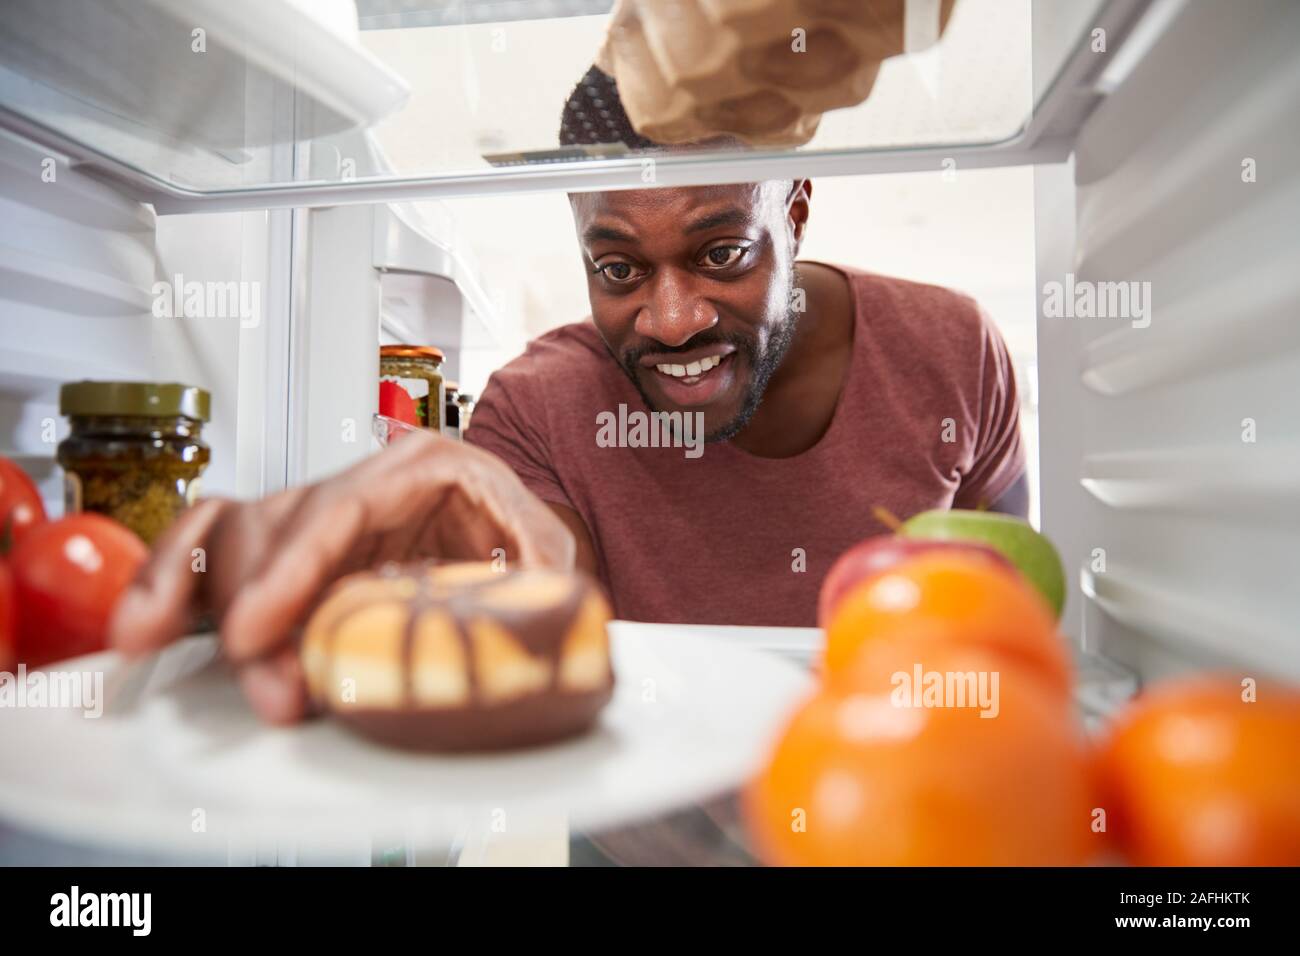 View Looking Out From Inside Of Refrigerator As Man Opens Door And Reaches For Unhealthy Donut Stock Photo